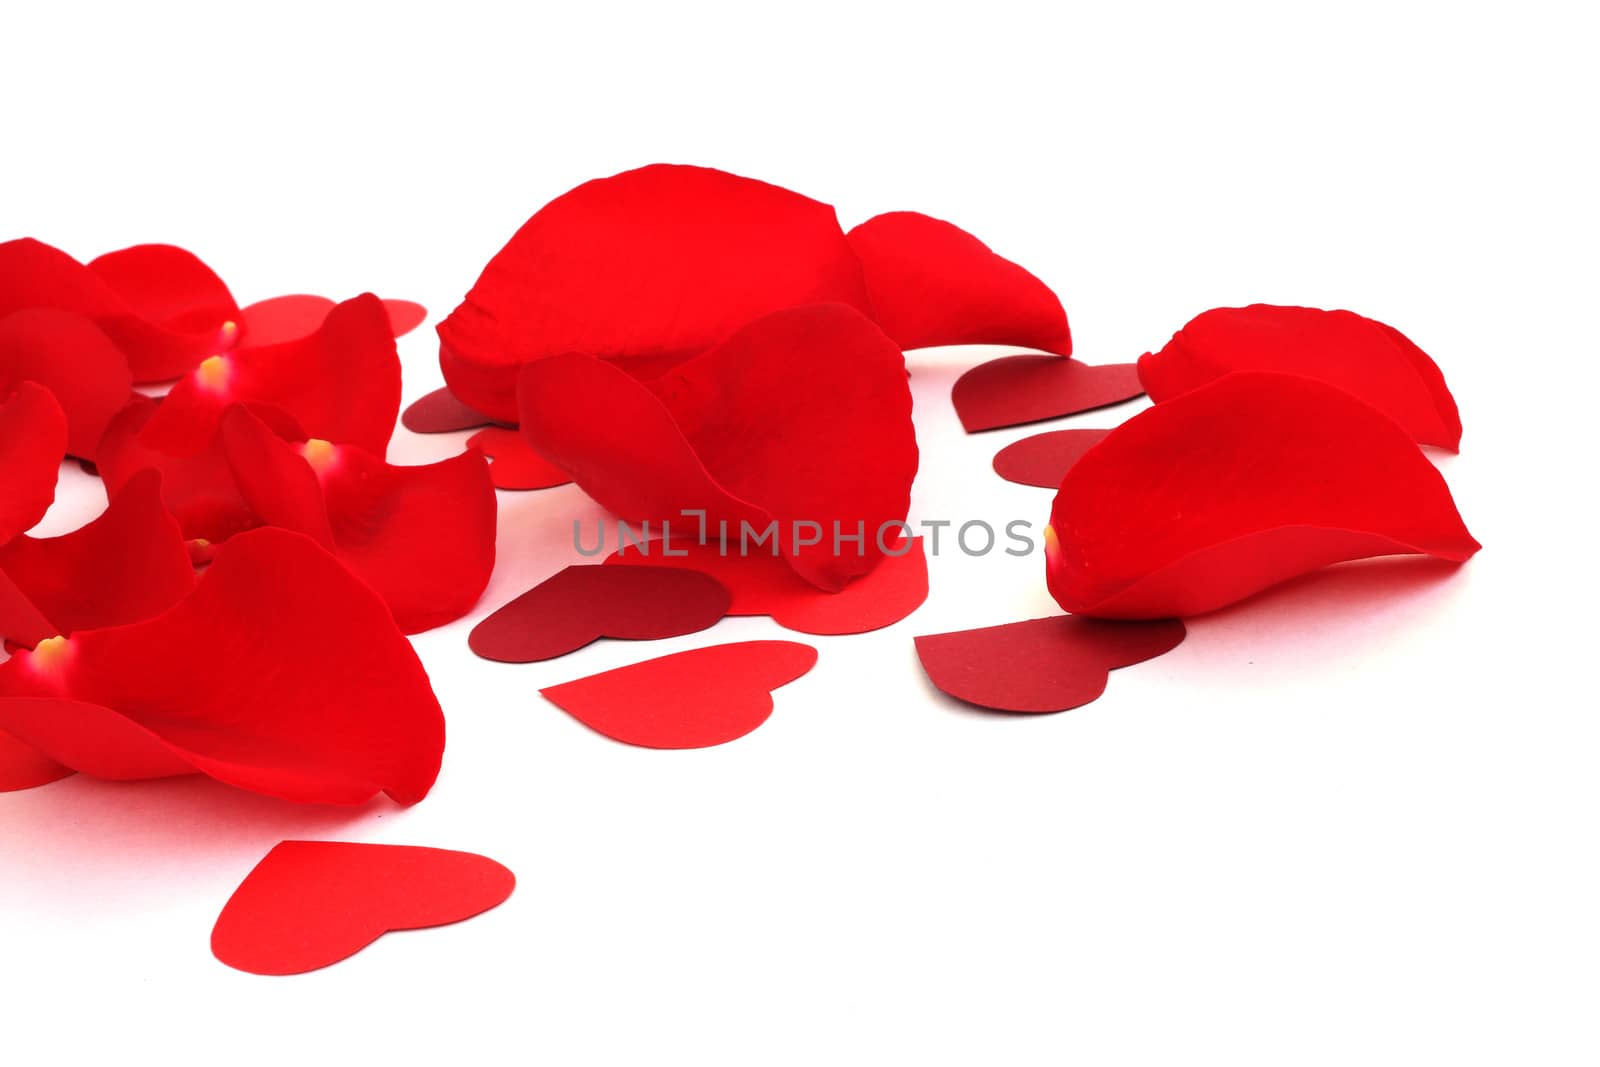 Rose petals and hearts isolated on white background